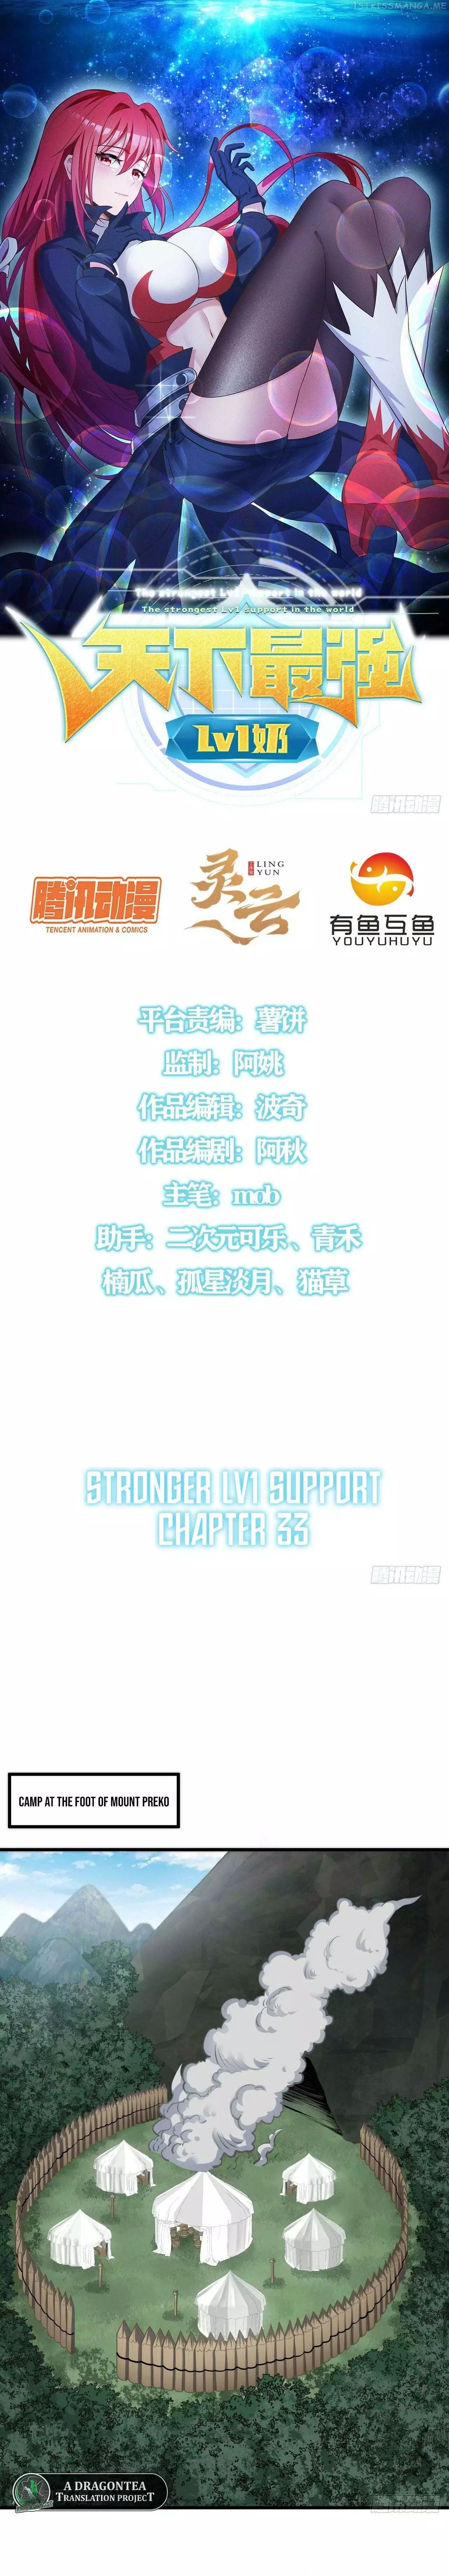 The Strongest Lvl1 Support - 33 page 2-22688c67